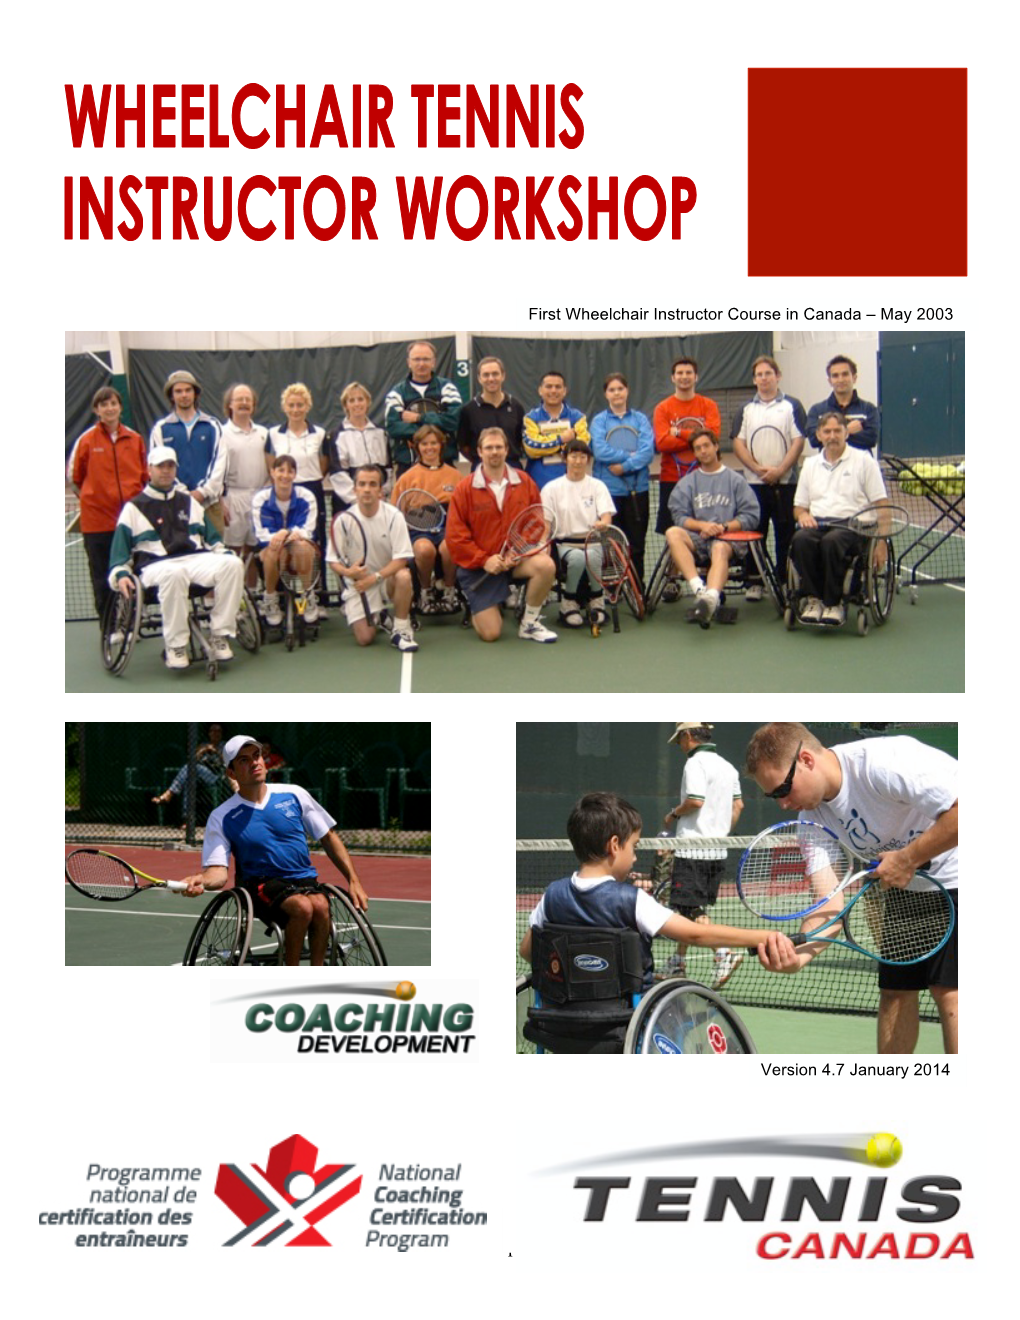 I First Wheelchair Instructor Course in Canada – May